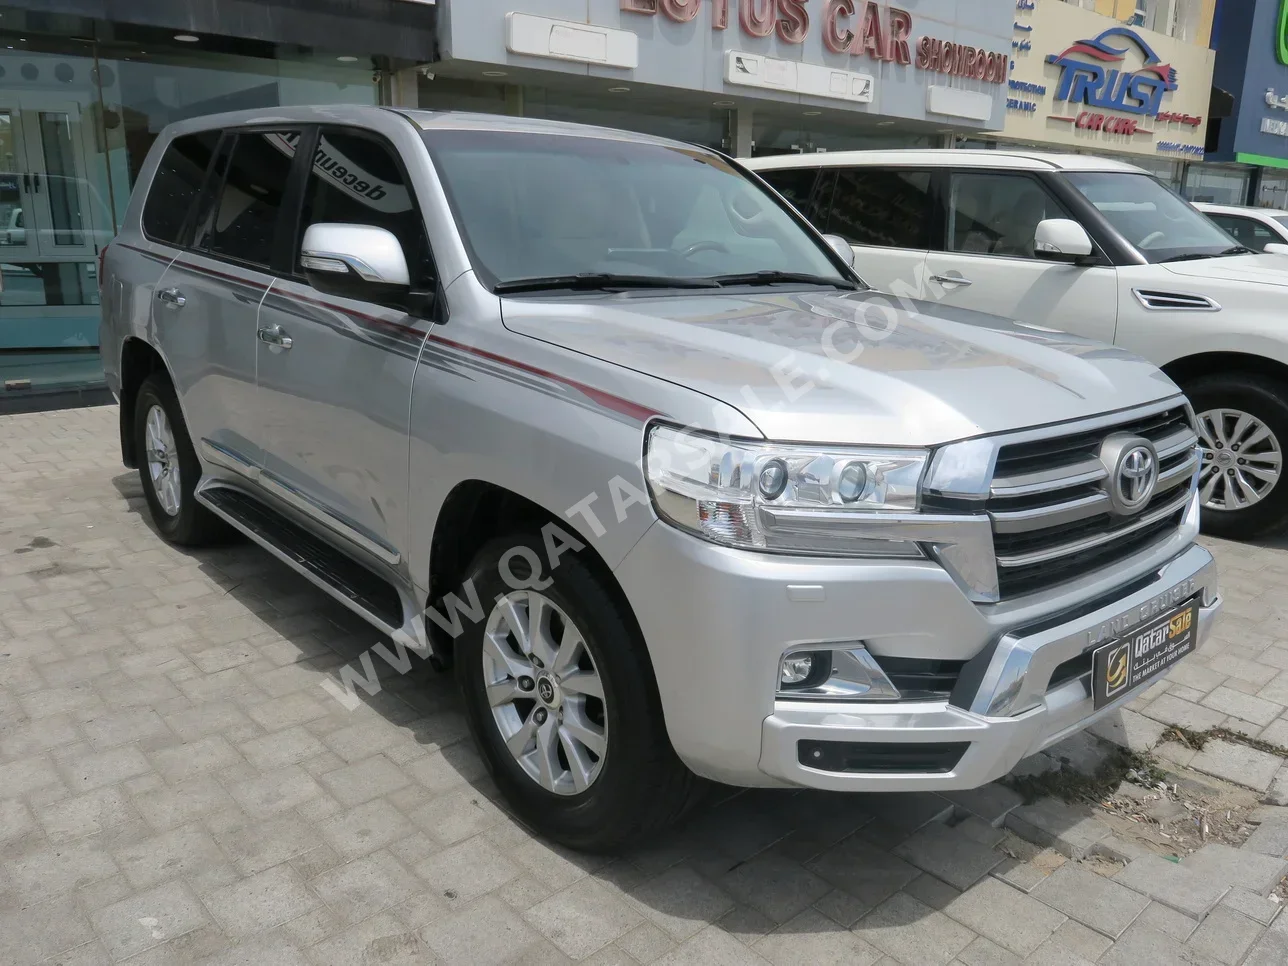 Toyota  Land Cruiser  GXR  2020  Automatic  110,000 Km  8 Cylinder  Four Wheel Drive (4WD)  SUV  Silver  With Warranty